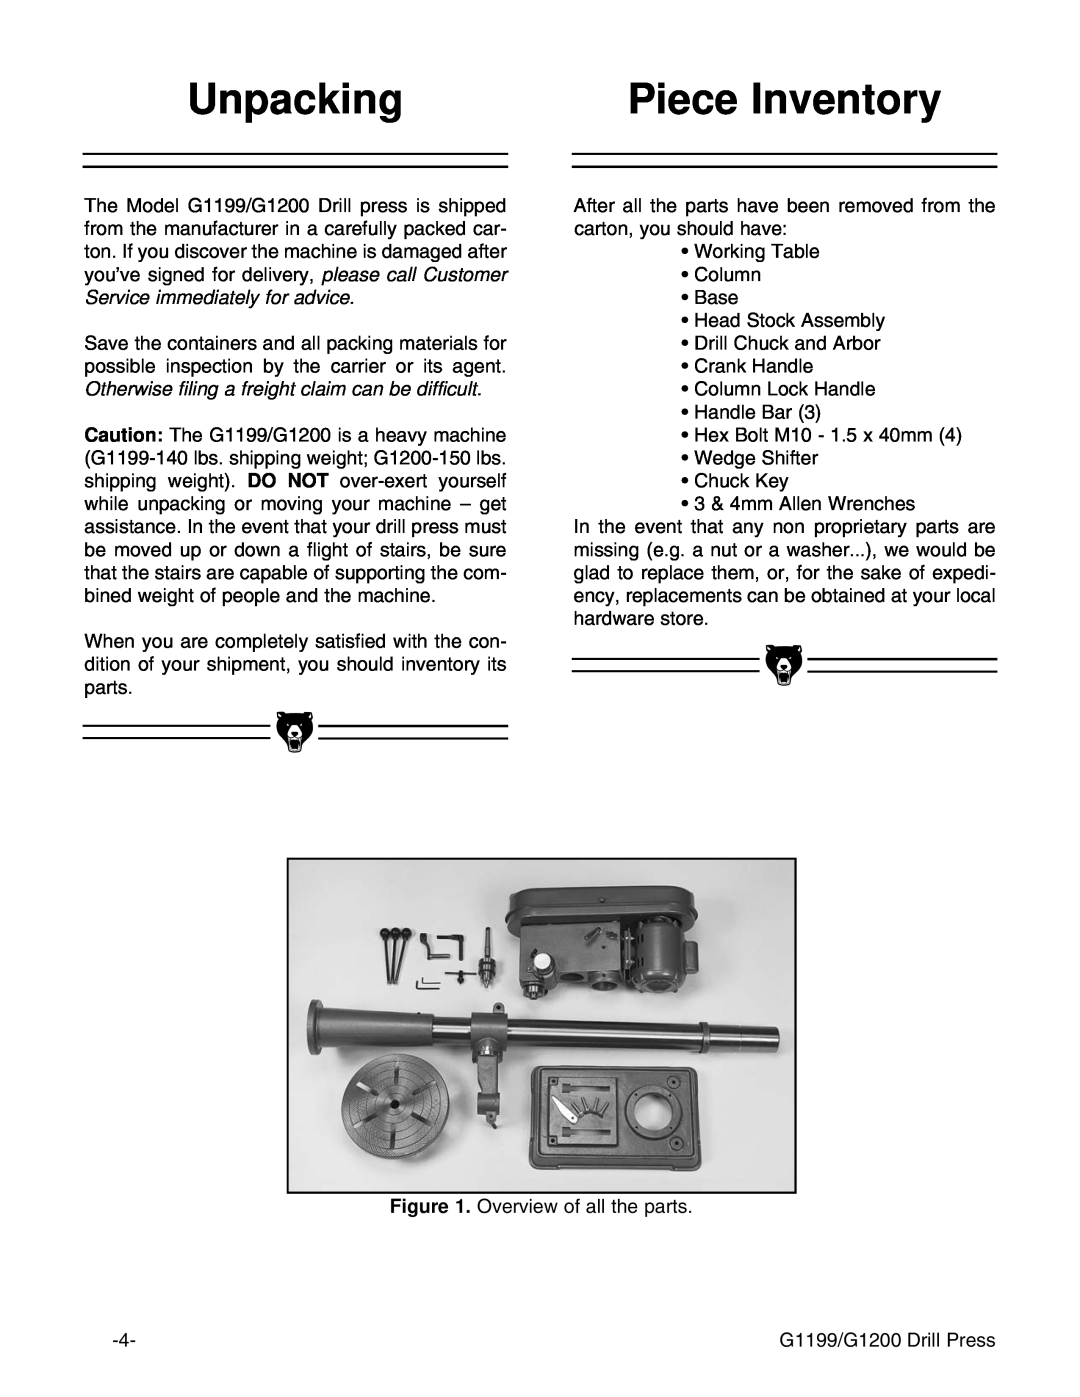 Grizzly G1199, G1200 instruction manual Unpacking, Piece Inventory 